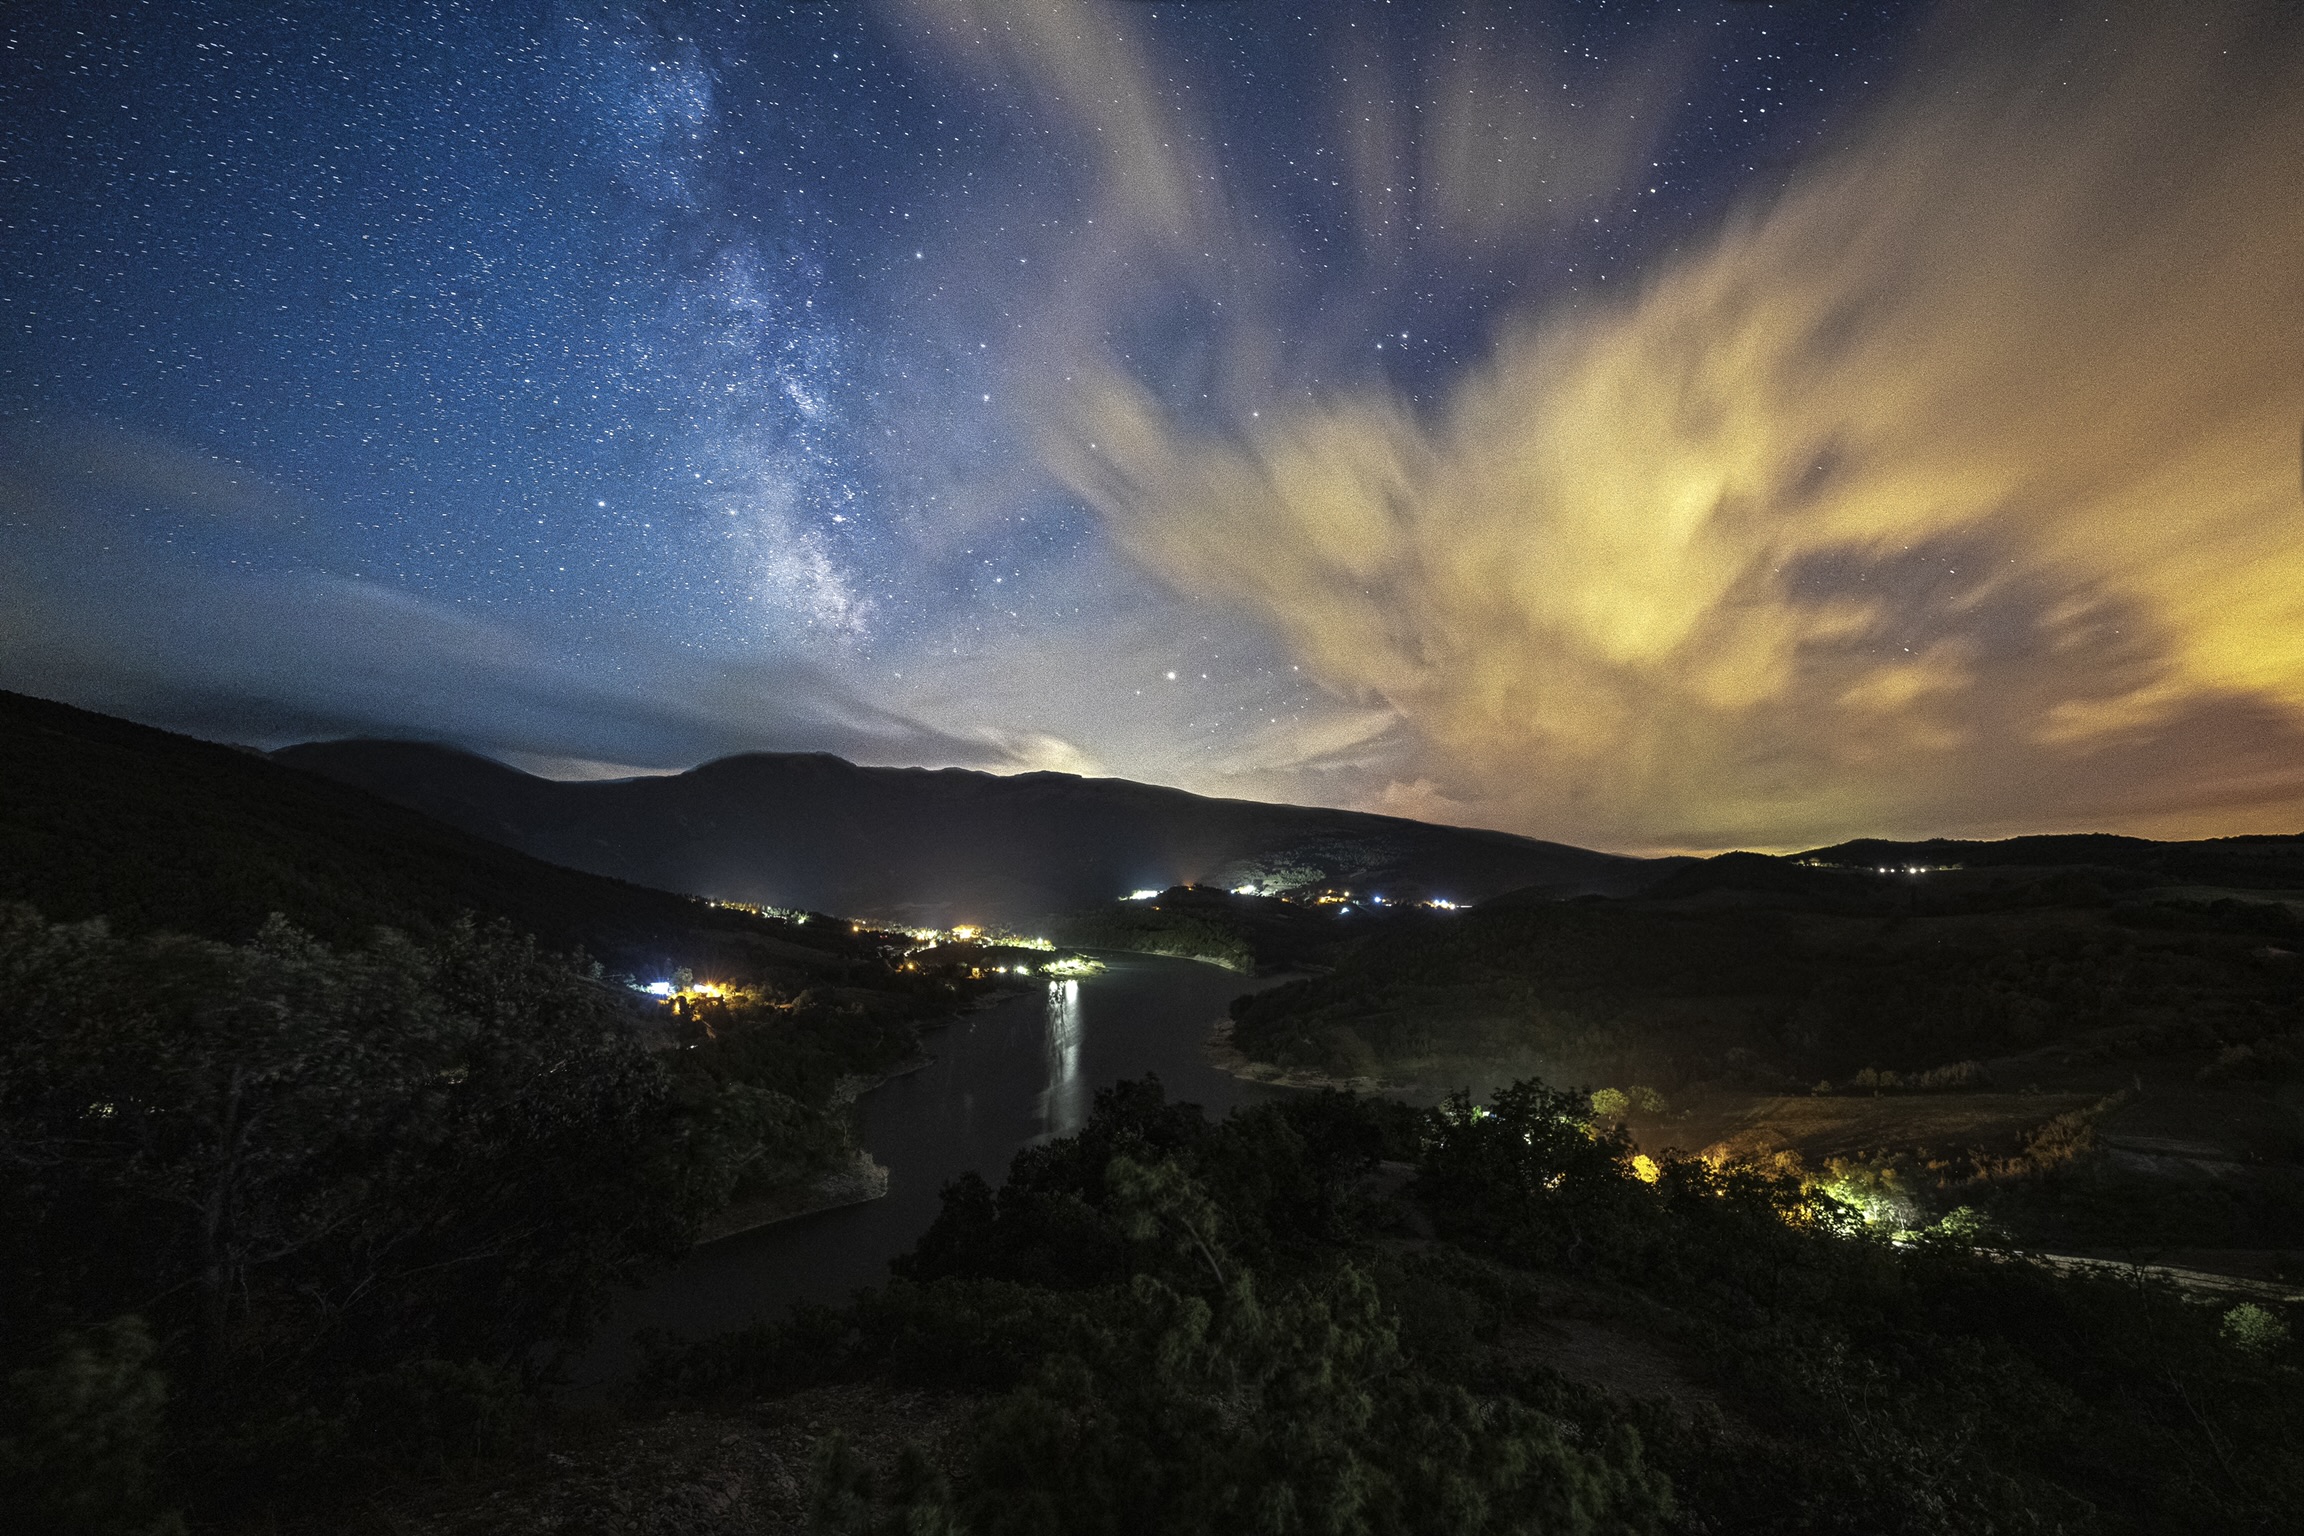 Among the stars and clouds, Lake Fiastra ...